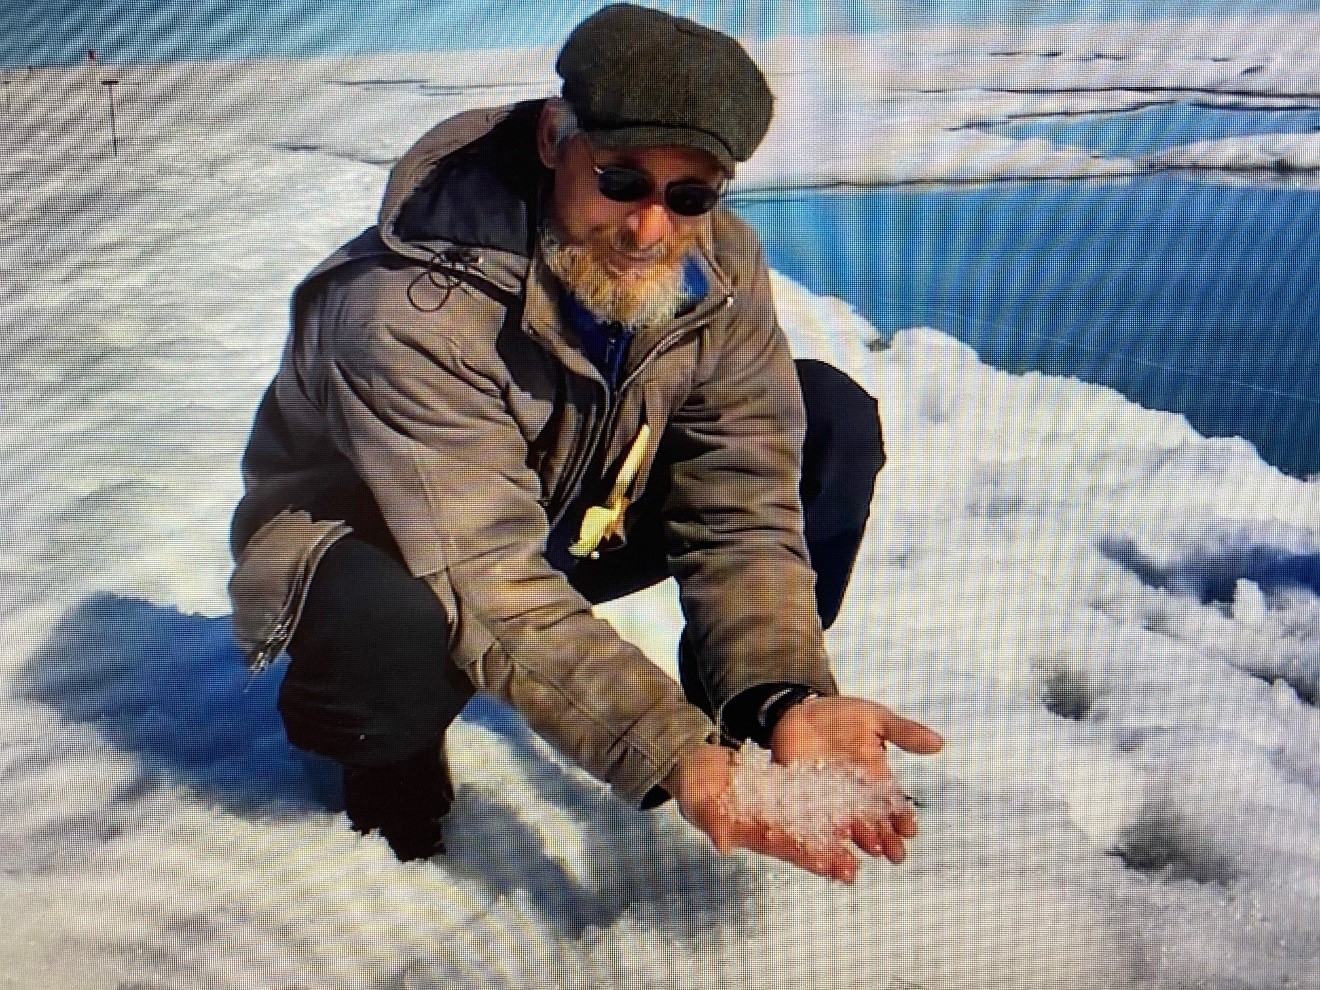 During a 2019 snow-sampling excursion in the North Slope of Alaska, Matthew Sturm scoops up icy snow near a springtime melt pond. YouTube screengrab from a video by the Geophysical Institute, University of Alaska Fairbanks.